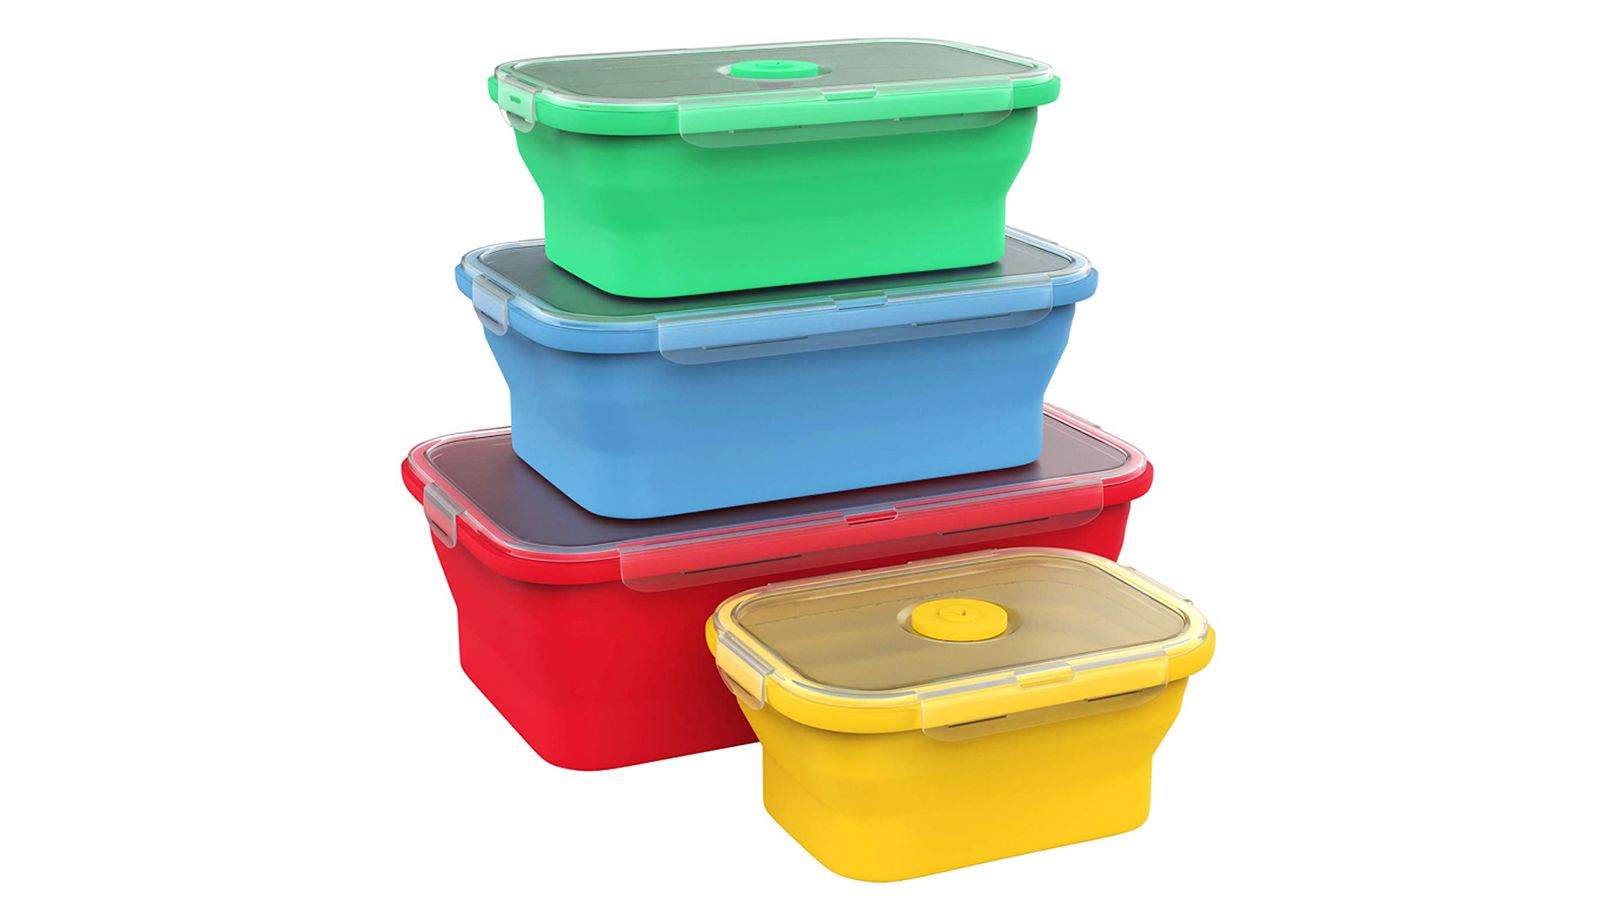 https://media.cnn.com/api/v1/images/stellar/prod/210930104206-best-meal-prep-containers-vremi-silicone-collapsible-food-storage-containers-set-of-4.jpg?q=w_1600,h_901,x_0,y_0,c_fill